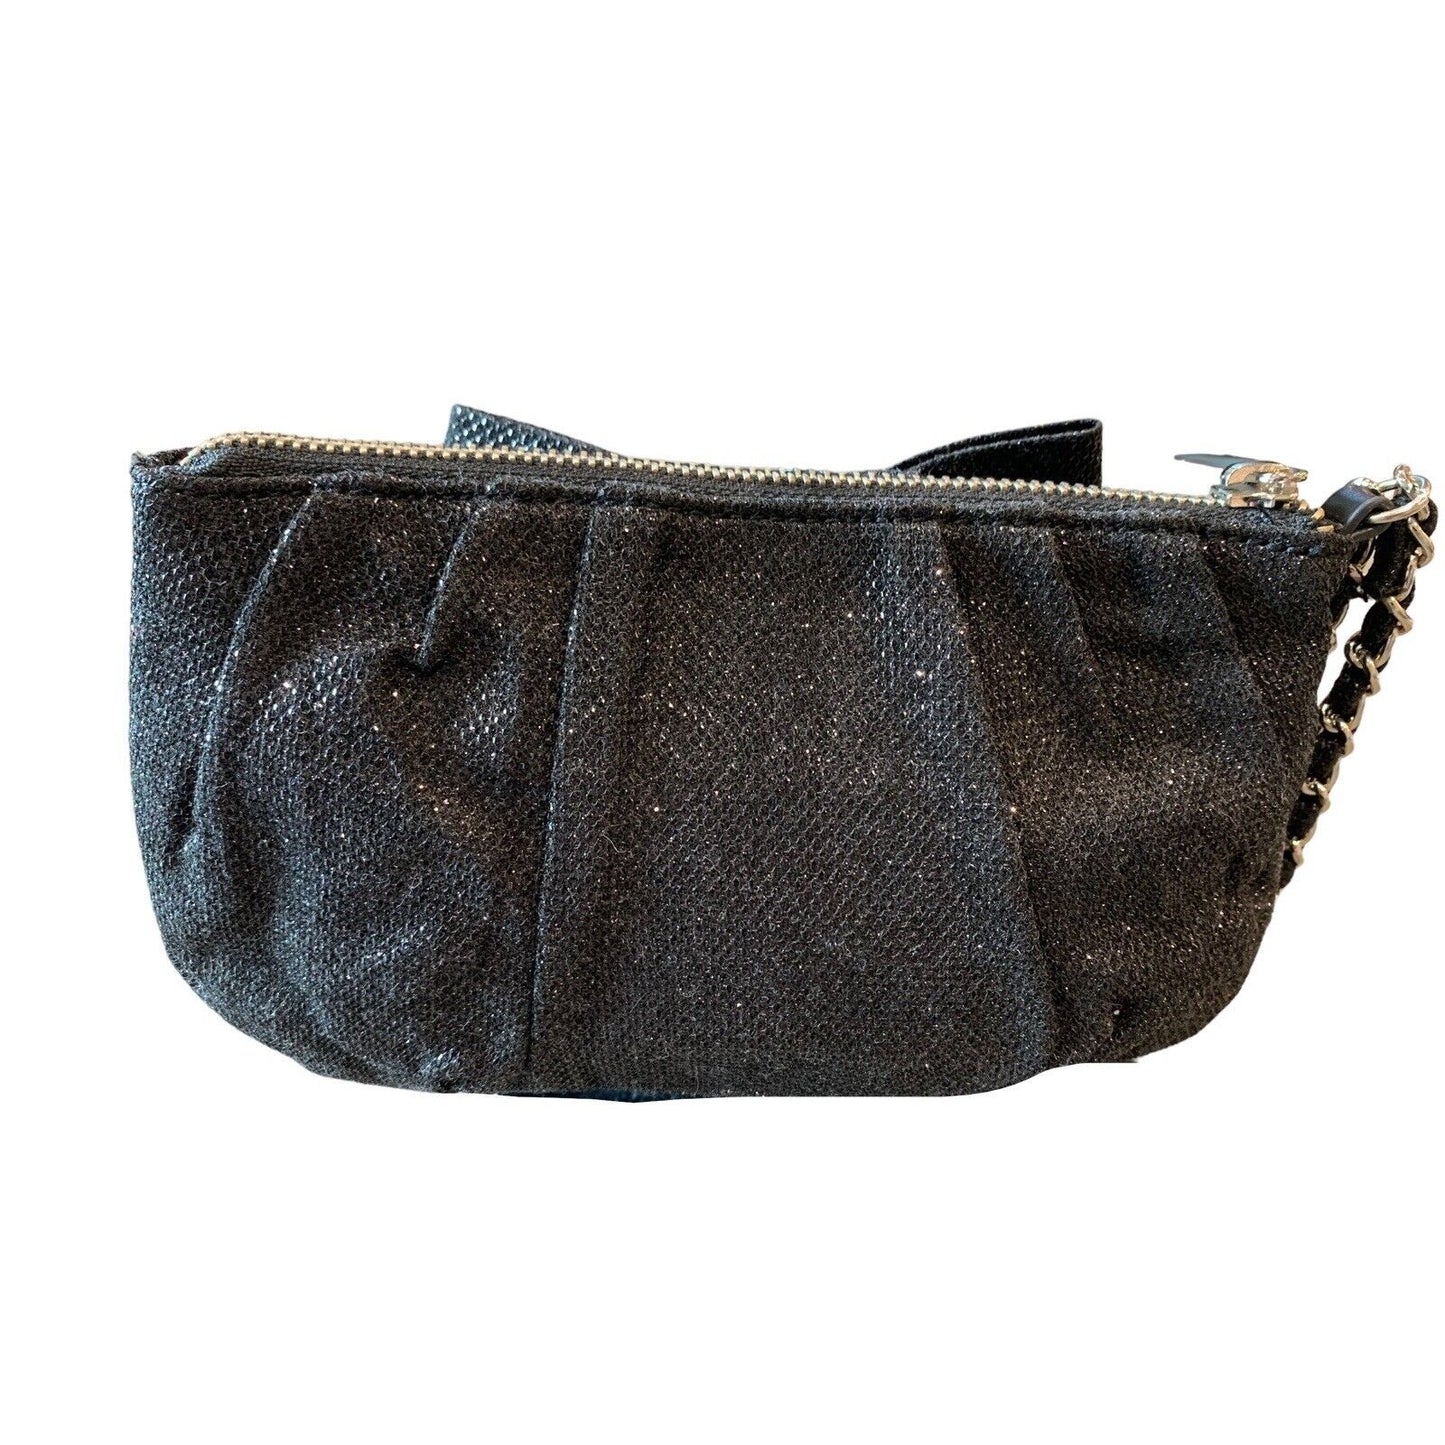 Express Glam Sparkle Wristlet Handbag With Large Bow Accent